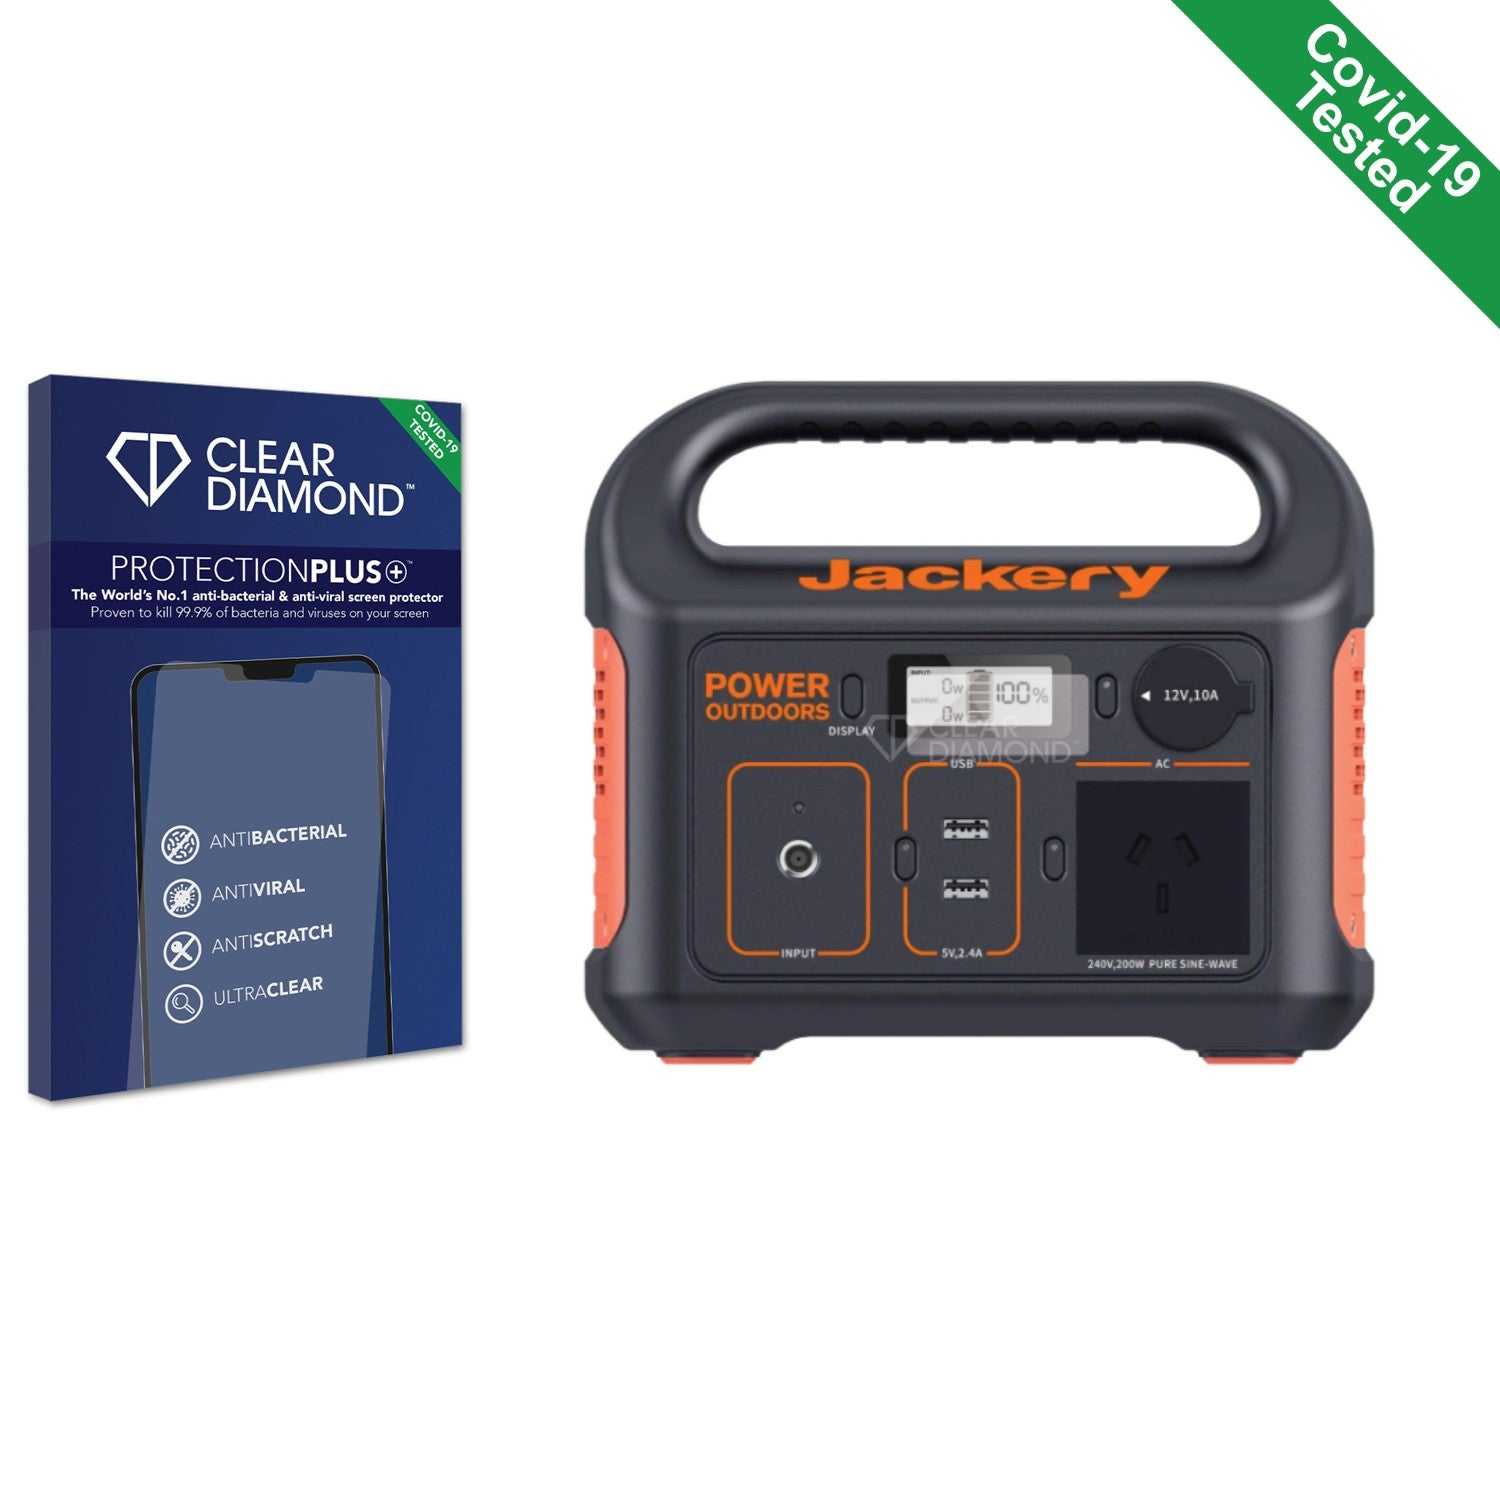 ScreenShield, Clear Diamond Anti-viral Screen Protector for Jackery Explorer 240 Portable Power Station